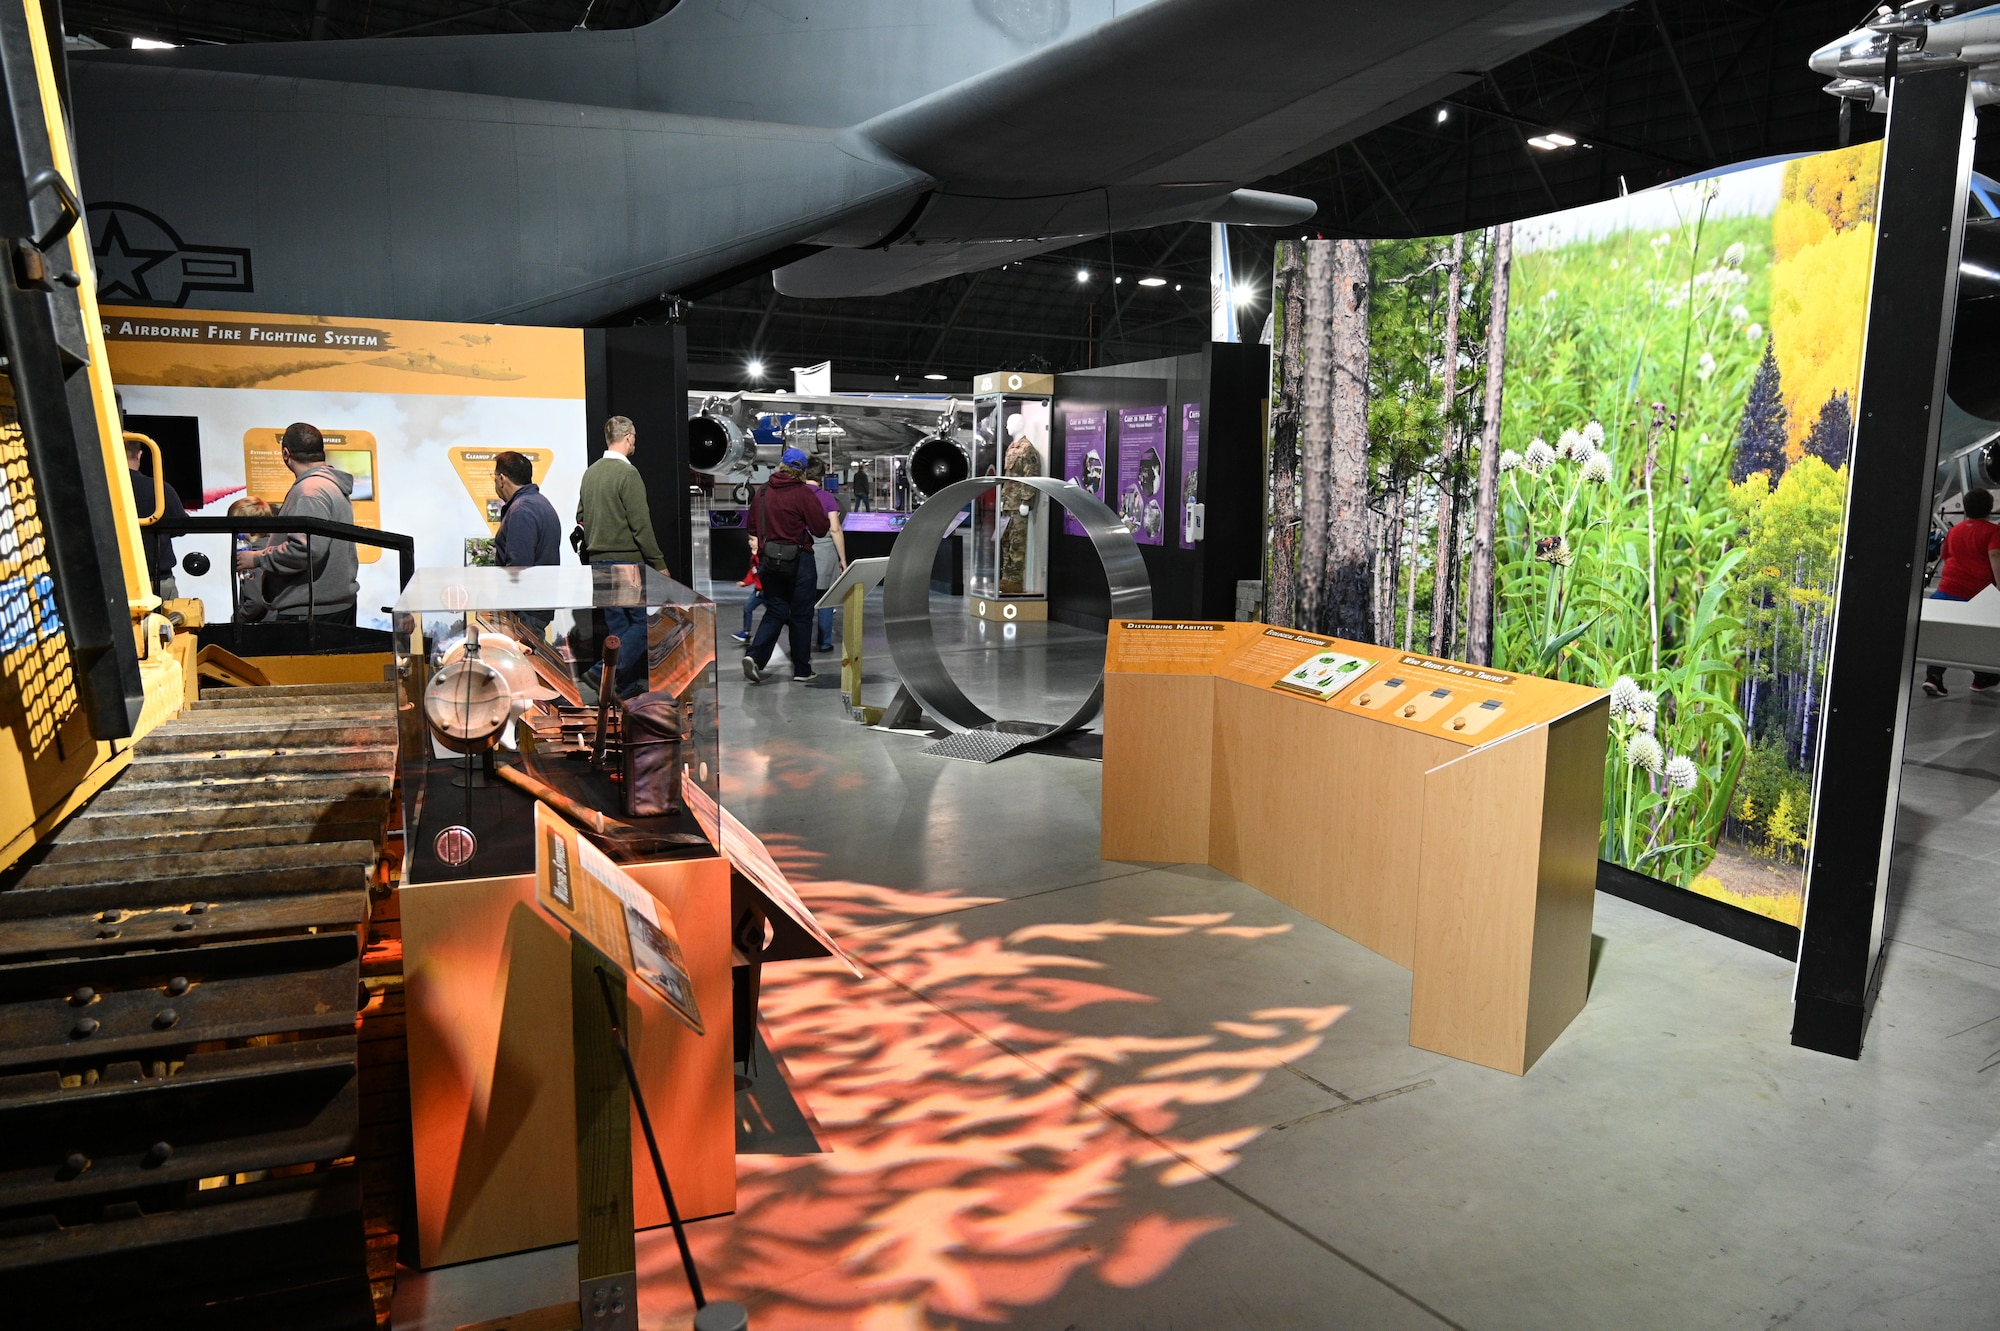 Image of the Global Firefighting mission portion of the Humanitarian Exhibit. On the left is the bulldozer used for firefighting with a light on the floor that replicates flames.